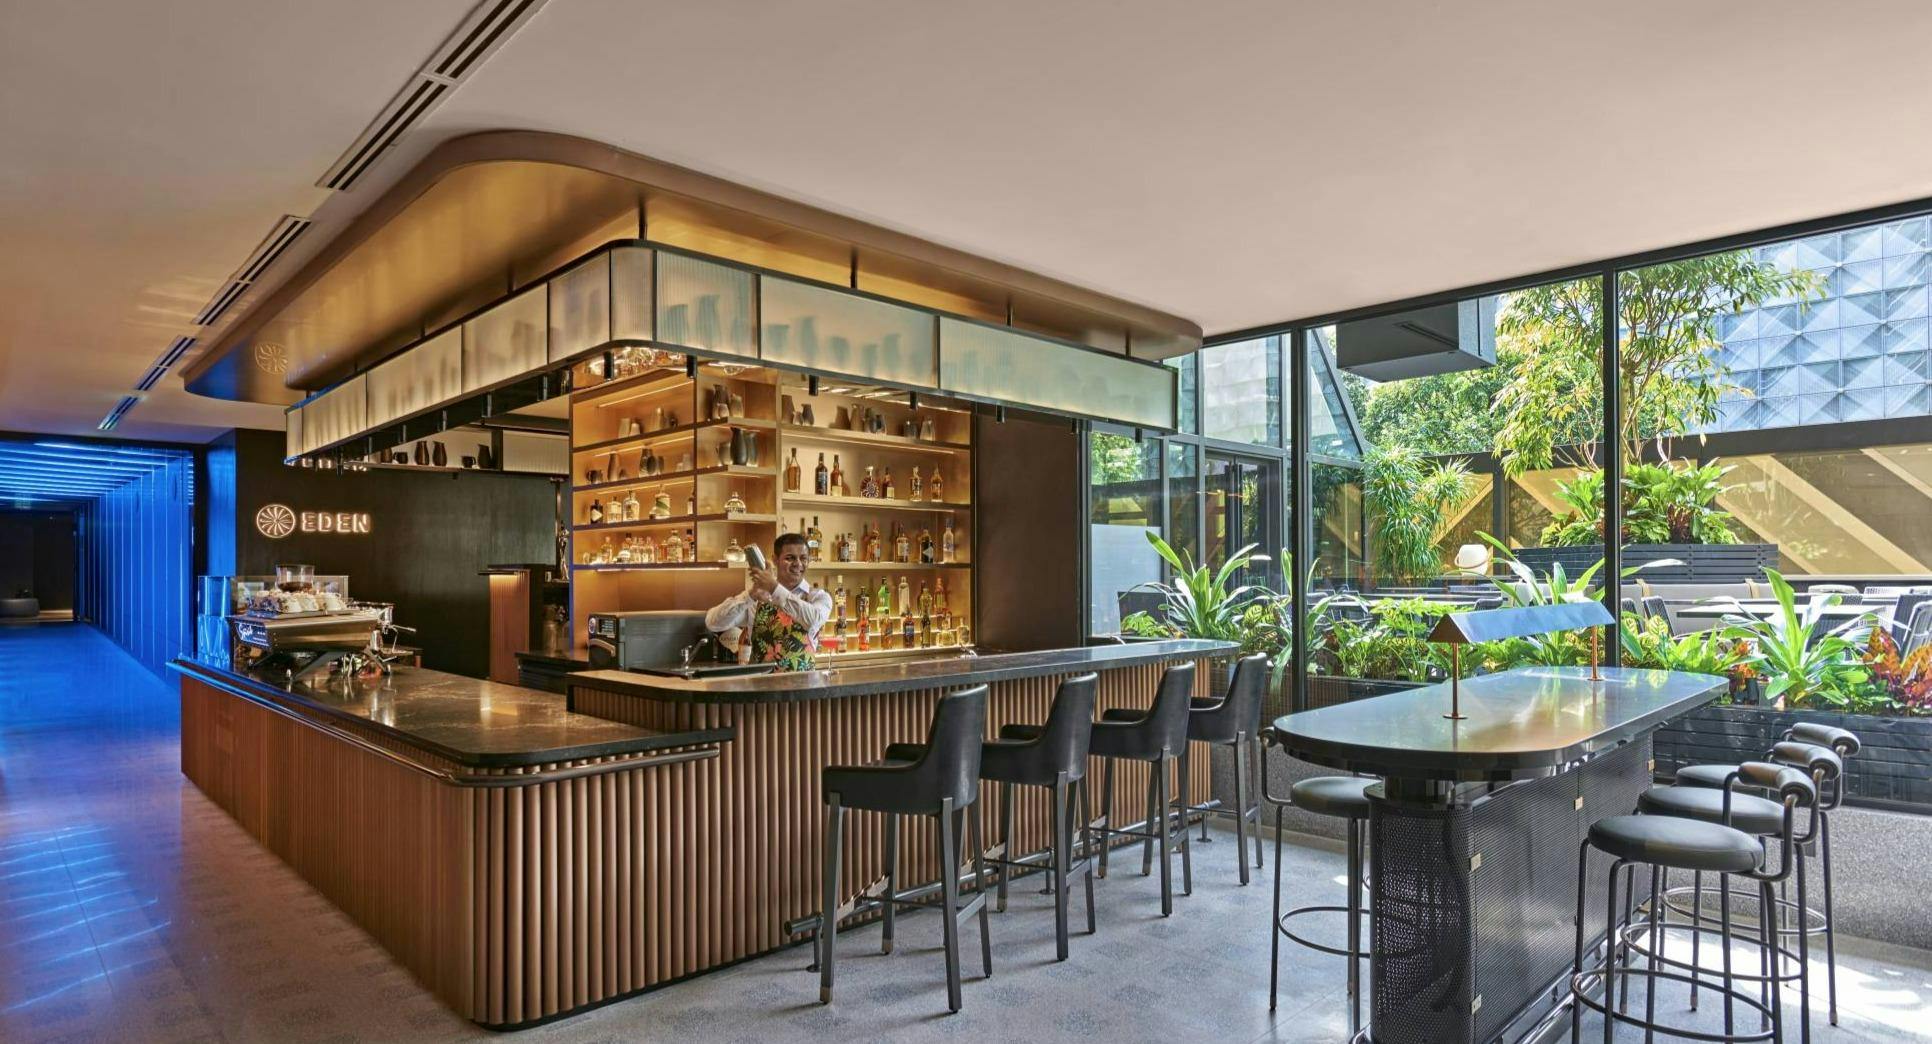 Photo of restaurant Atelier Lounge in Orchard, Singapore